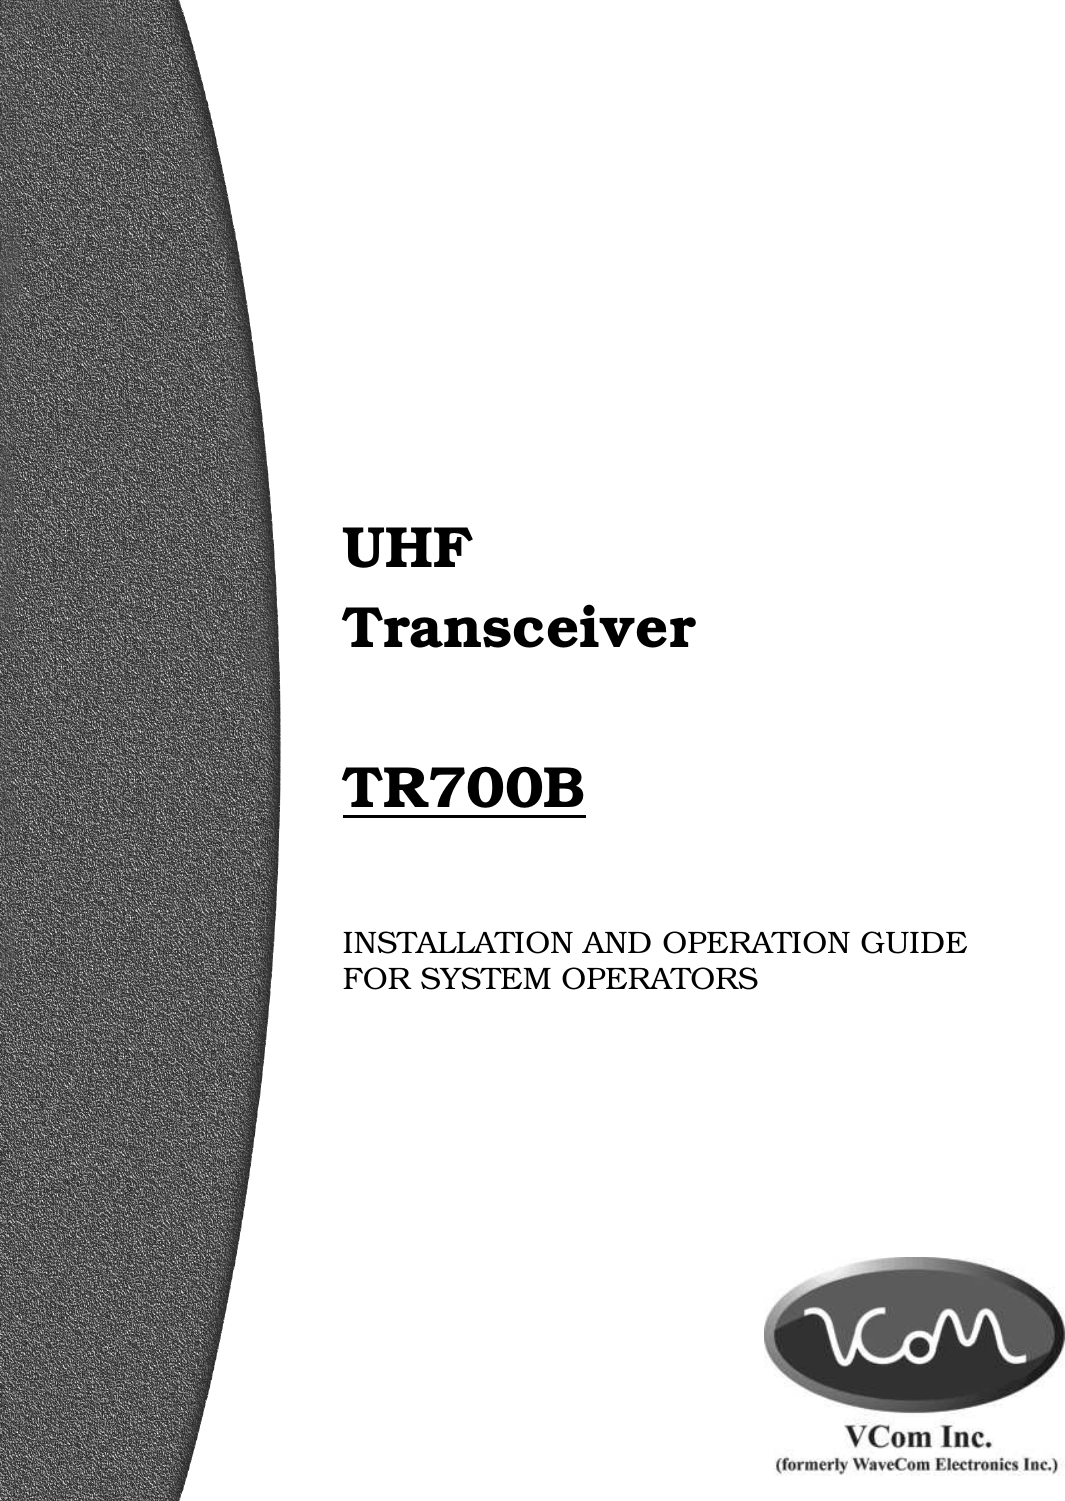                                  UHF Transceiver  TR700B   INSTALLATION AND OPERATION GUIDE FOR SYSTEM OPERATORS 